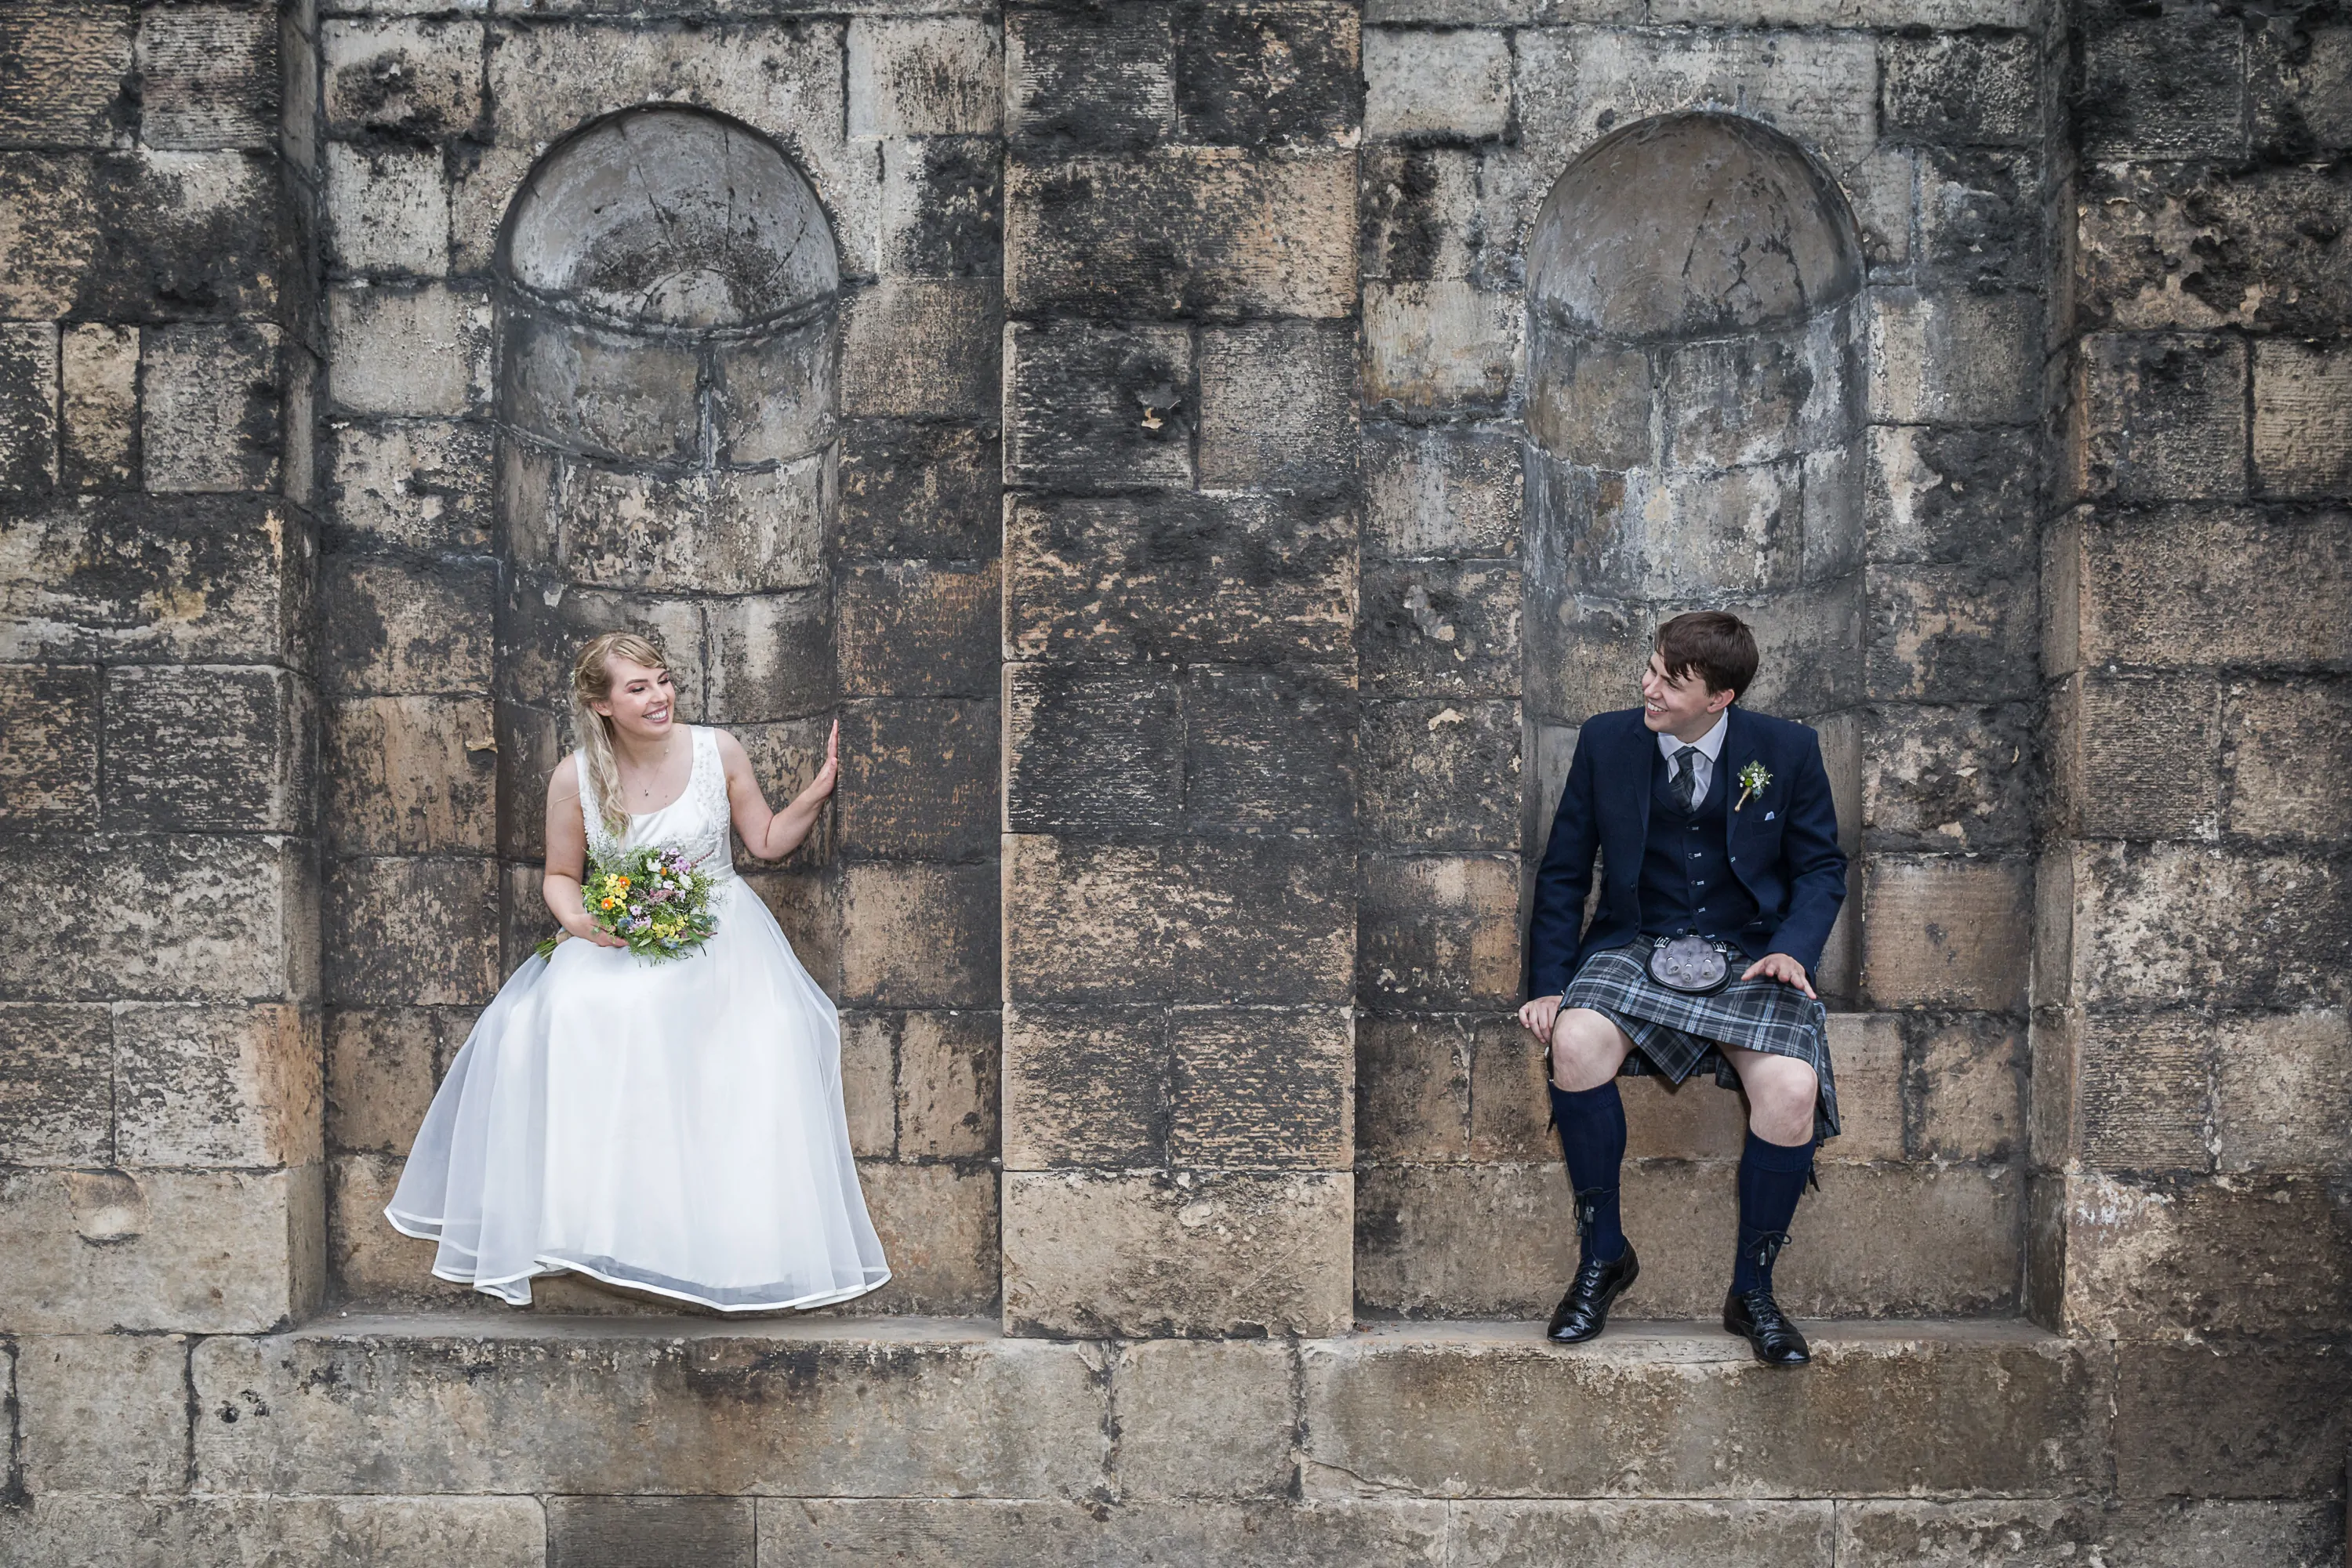 Wedding photography prices in Scotland